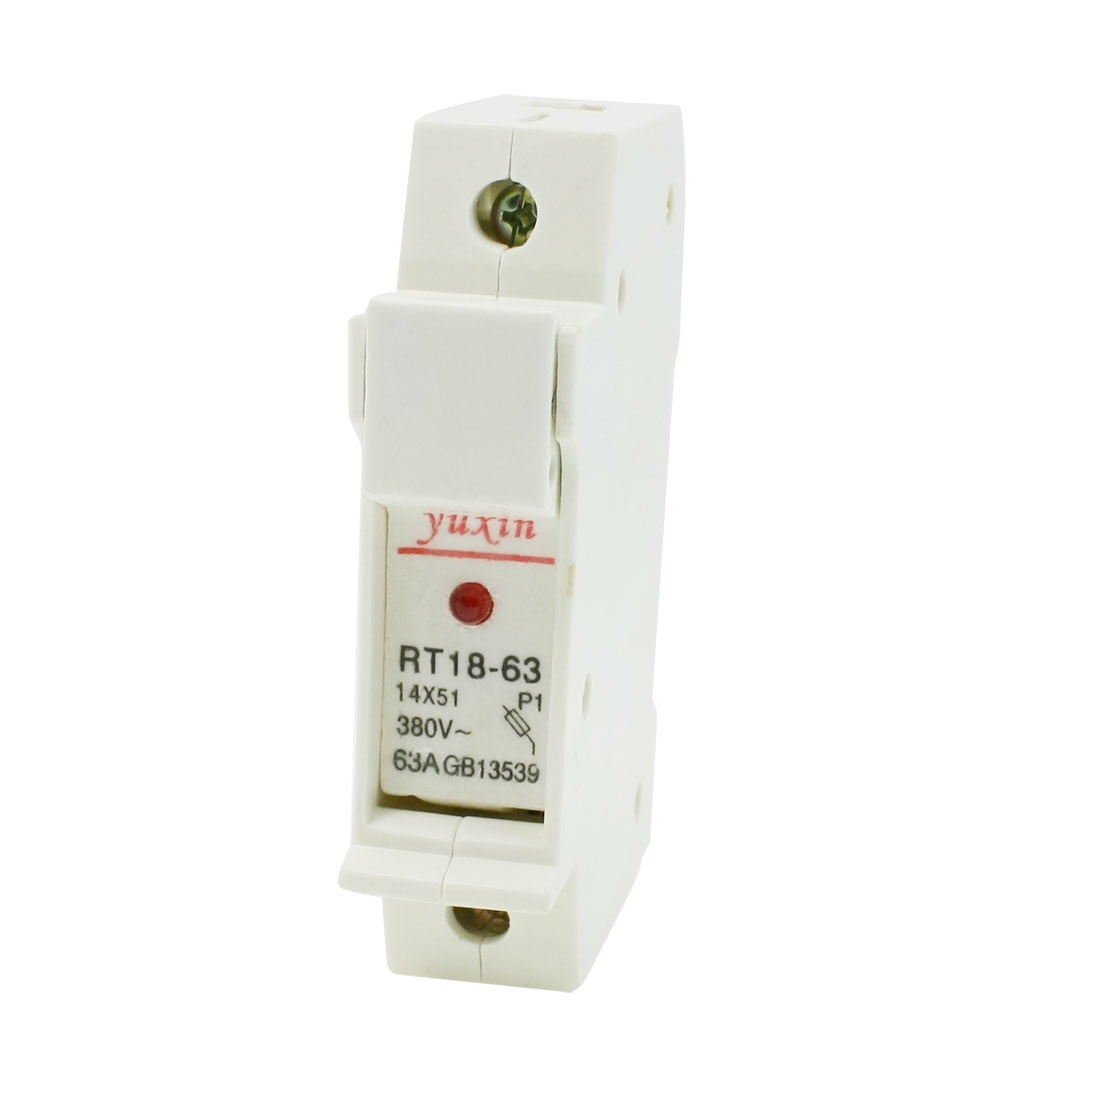 1PC 3 Pole Din Rail Mounting RT18-63 Fuse Holder for 14x51MM Fuse link 